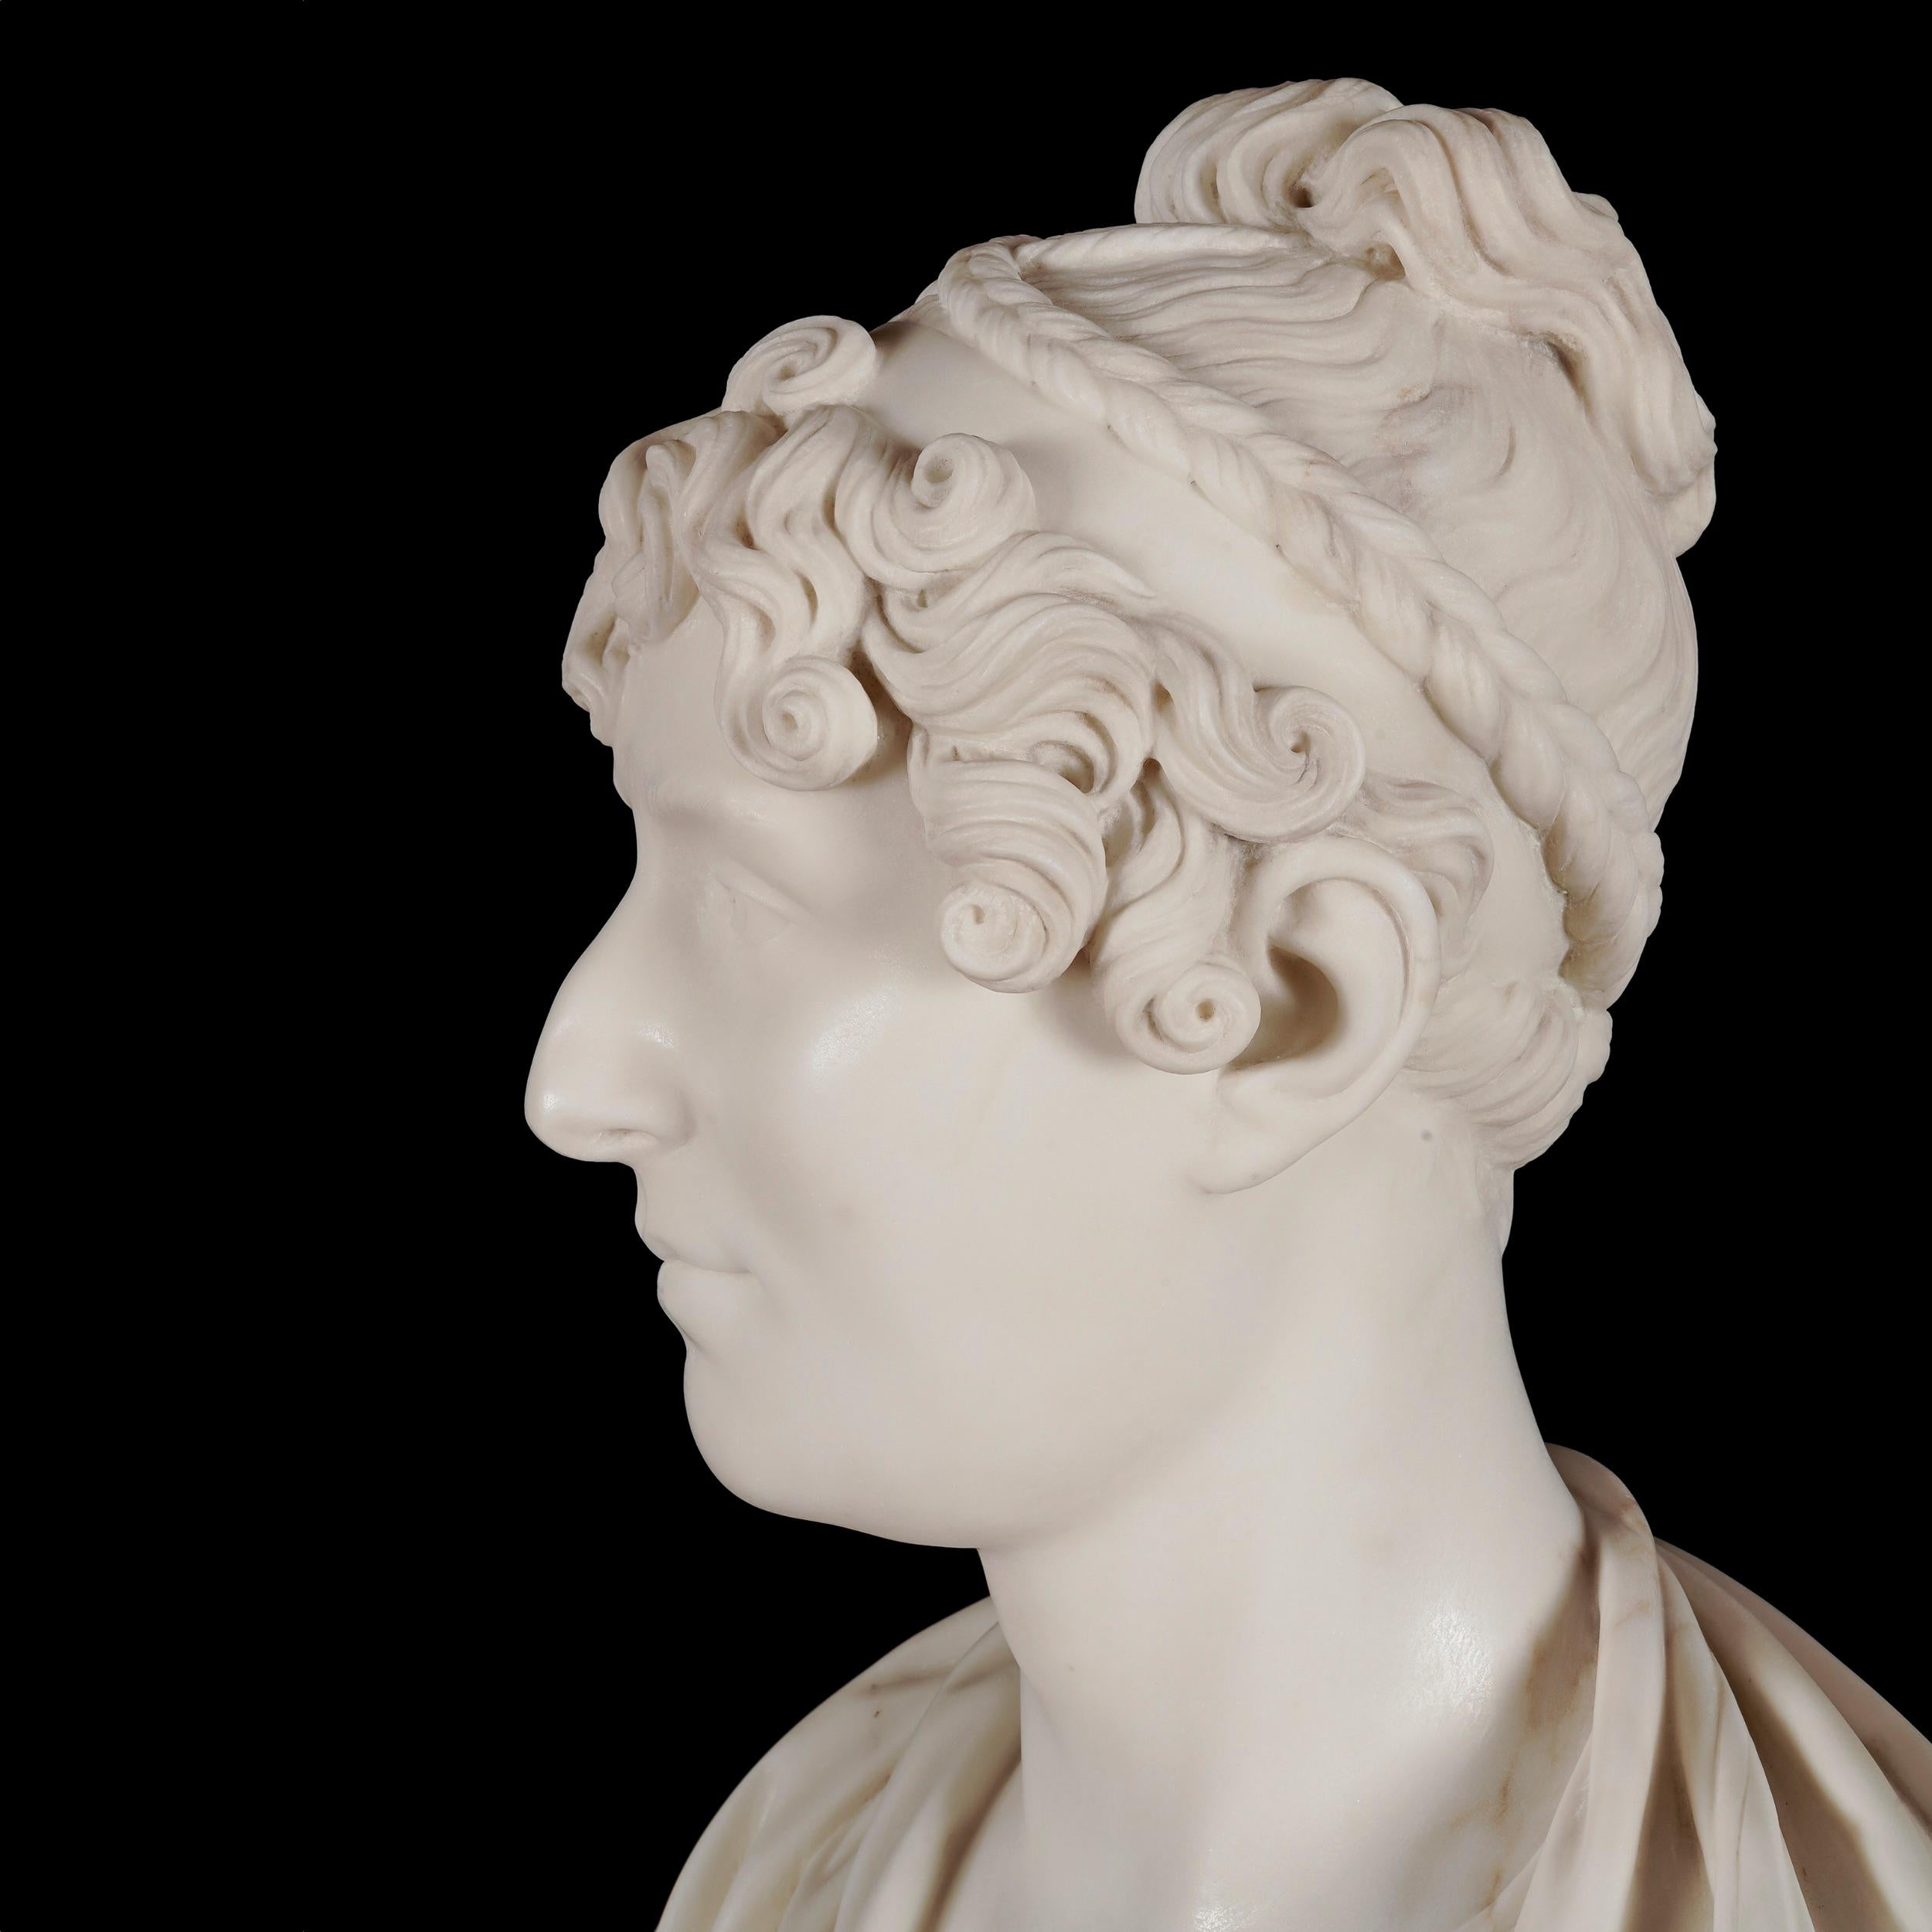 A Neoclassical Portrait Bust
By Lewis Alexander Goblet (1764-c.1823)

Possibly exhibited at the Royal Academy in 1821

Carved from Carrara marble, the bust supported on a waisted circular socle; representing a lady, dressed in the antique